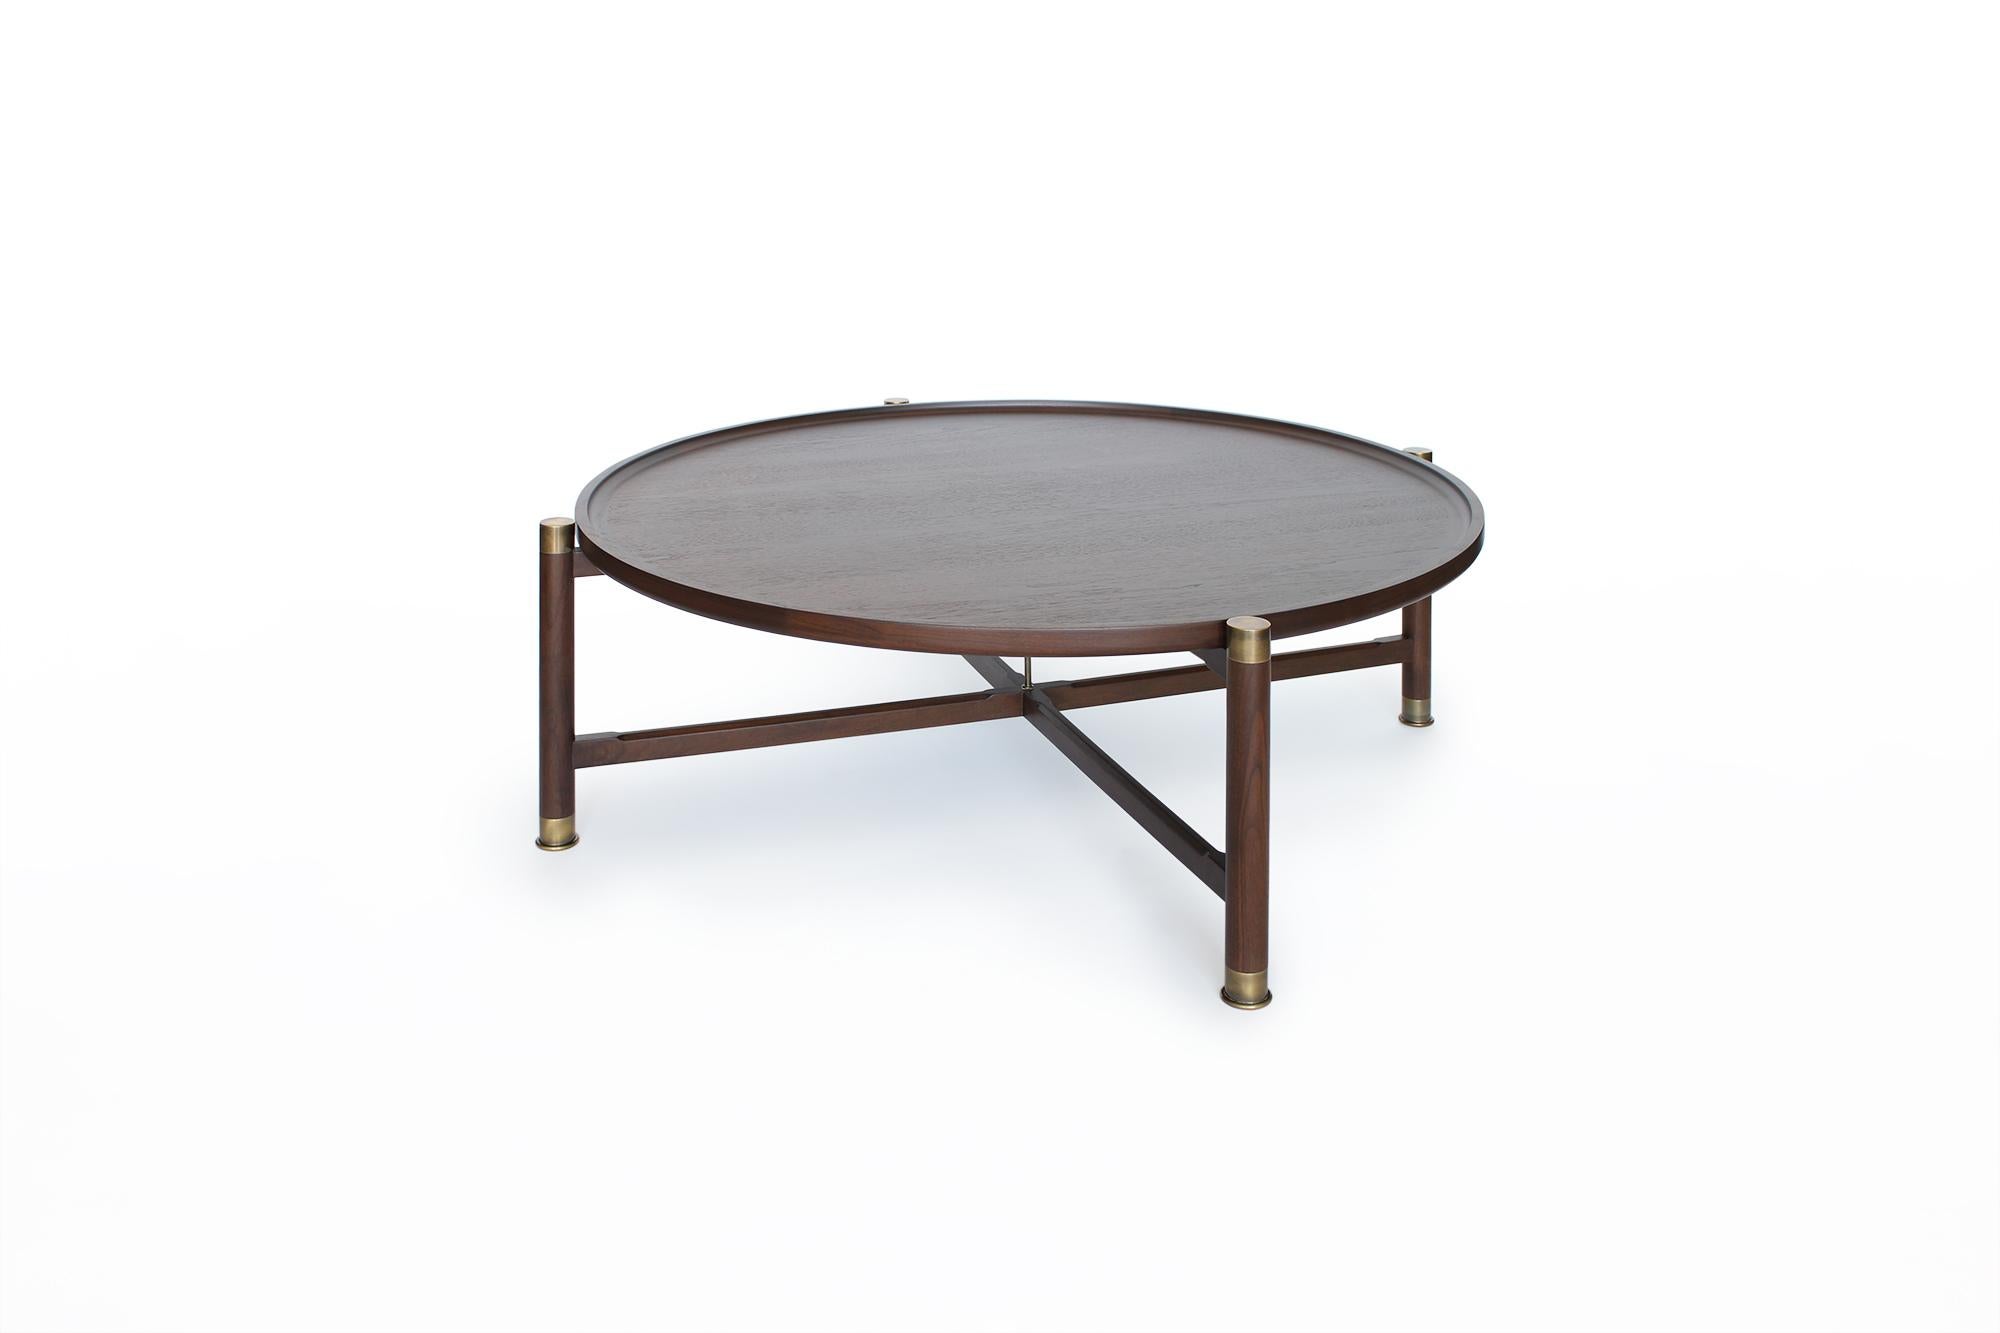 American Otto Round Coffee Table in Medium Walnut with Antique Brass Fittings For Sale